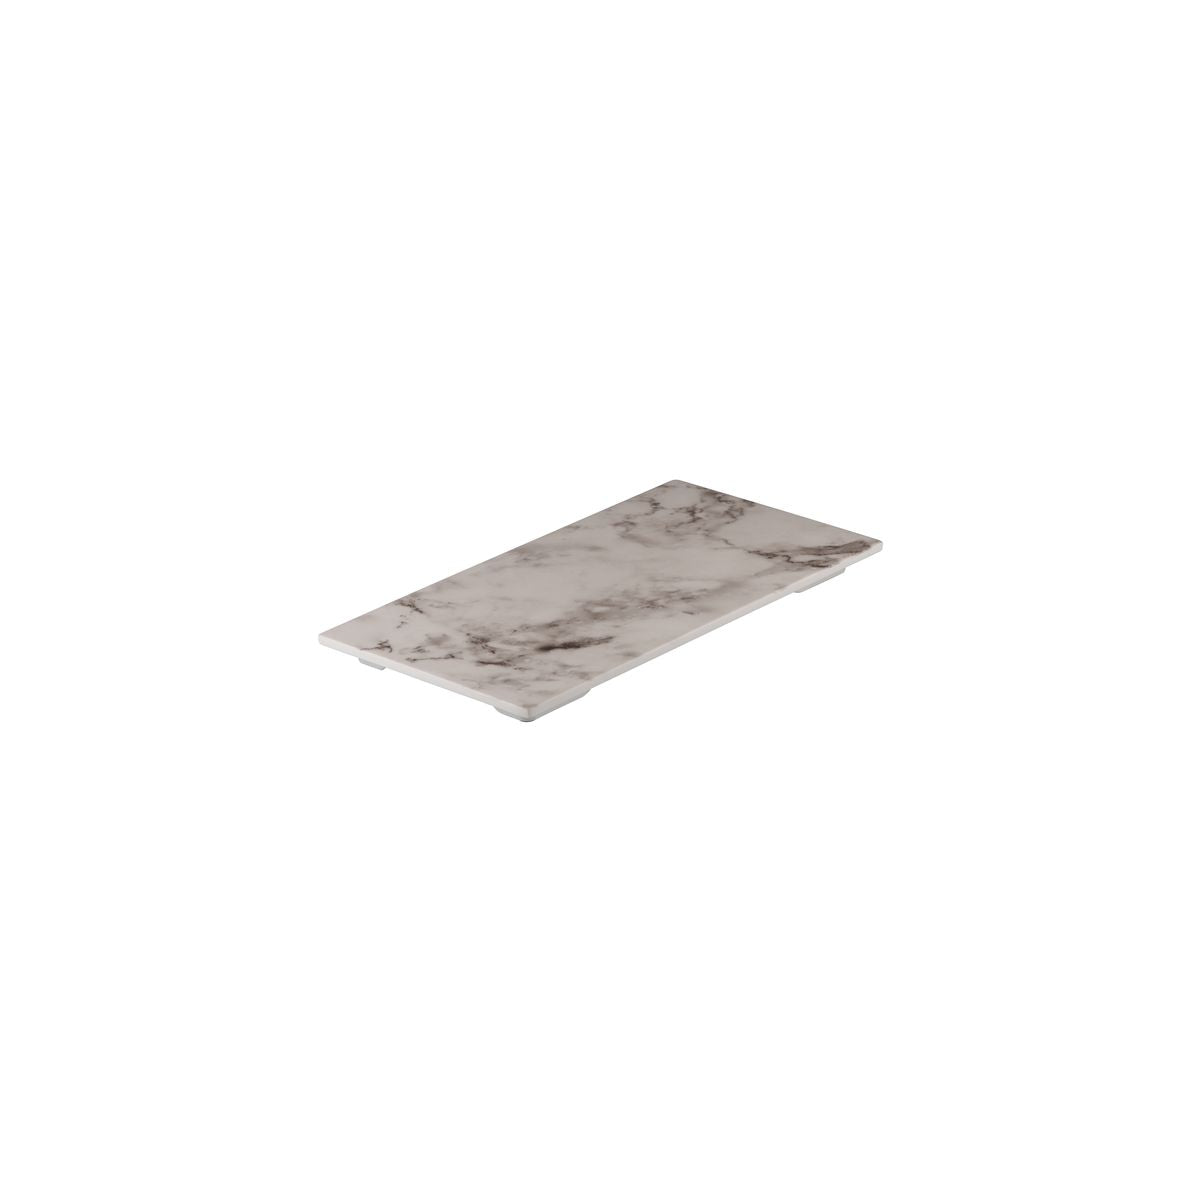 Flat Rectangular Platter, 325 x 176mm, Melamine - White Marble from Ryner Melamine. Sold in boxes of 3. Hospitality quality at wholesale price with The Flying Fork! 